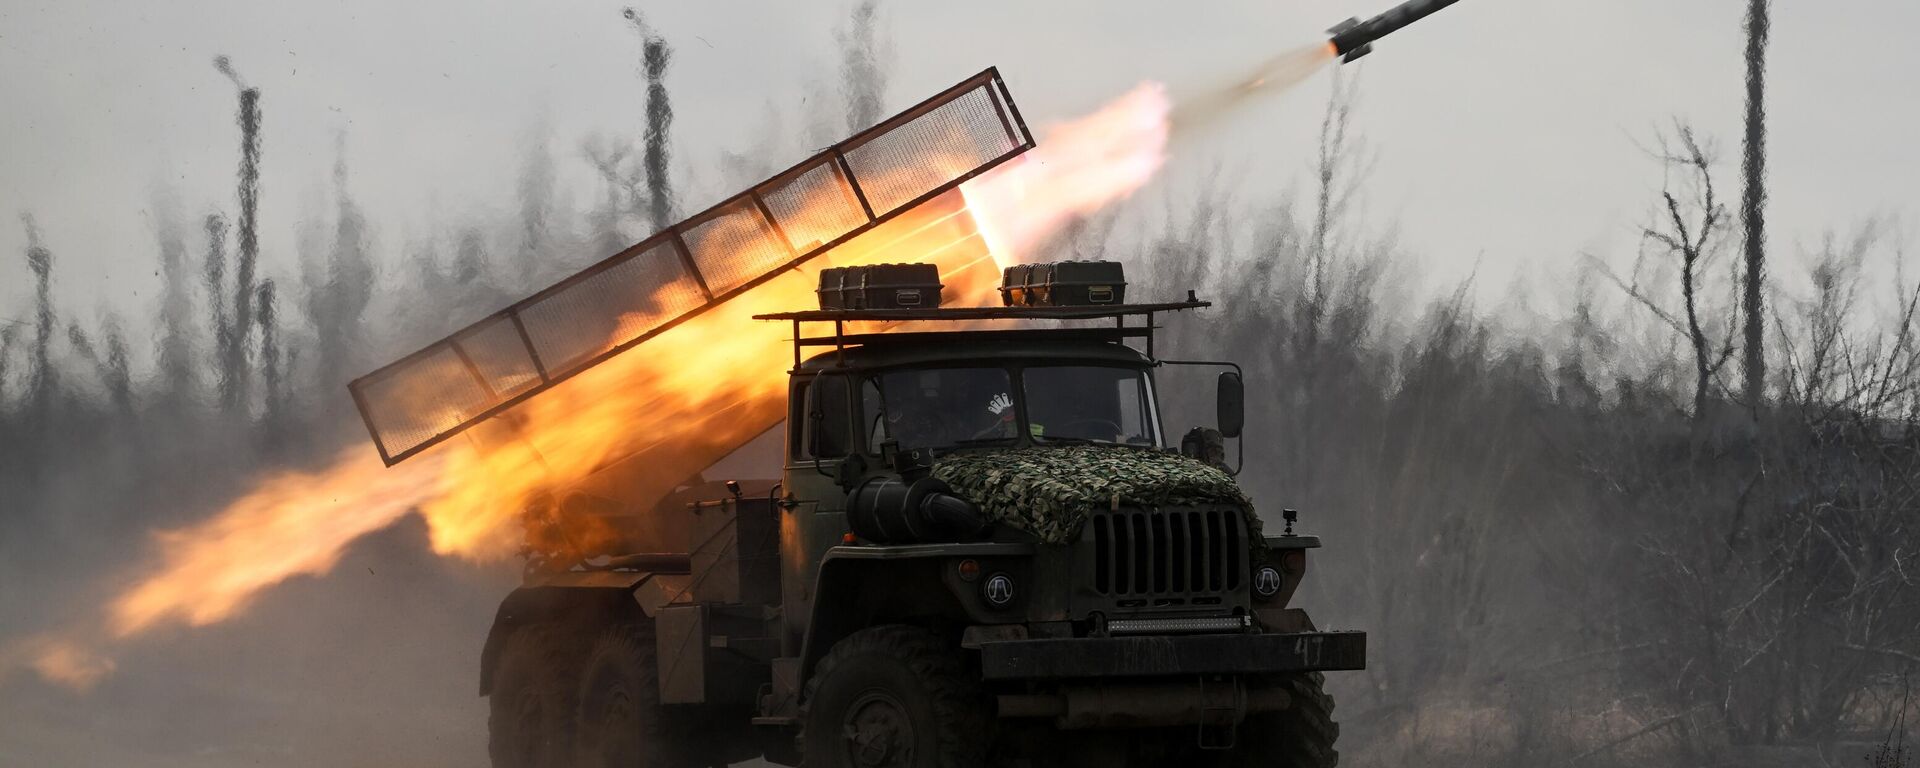 The BM-21 Grad multiple launch rocket system (MLRS) of the Tsentr Battlgroup of the Russian Armed Forces operates in places where manpower is concentrated and strongholds of the Ukrainian Armed Forces in the Avdeyevka vicinity. - Sputnik Africa, 1920, 31.03.2024